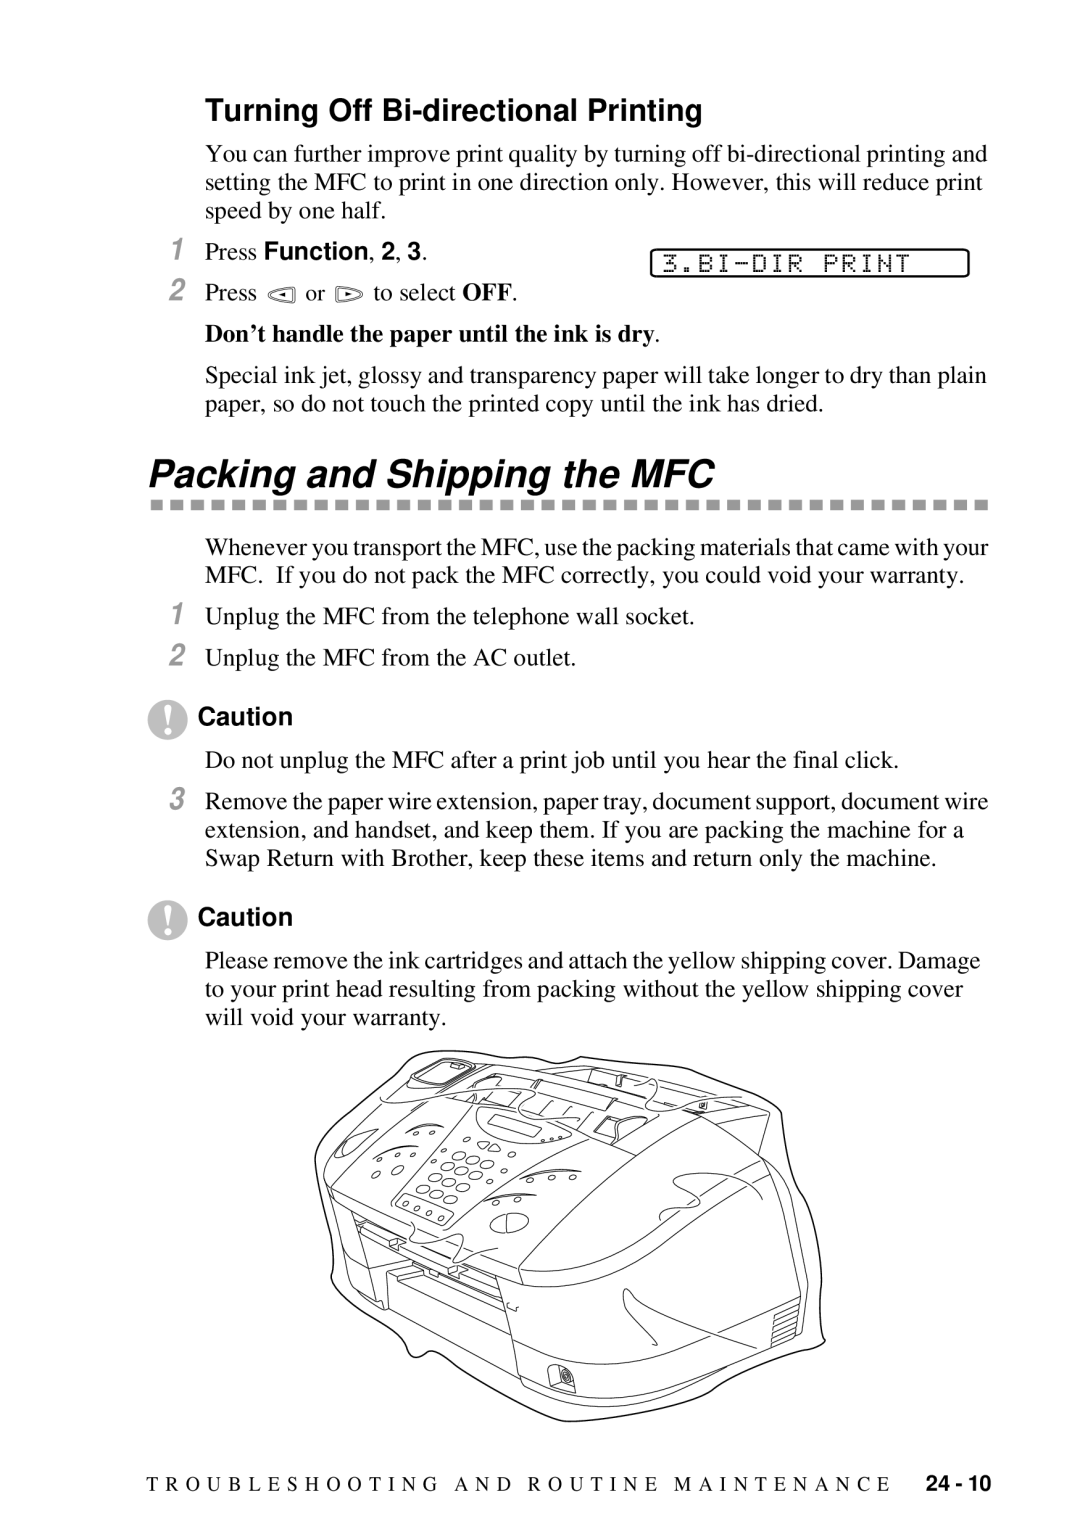 Brother MFC-7300C manual Packing and Shipping the MFC, Don’t handle the paper until the ink is dry 